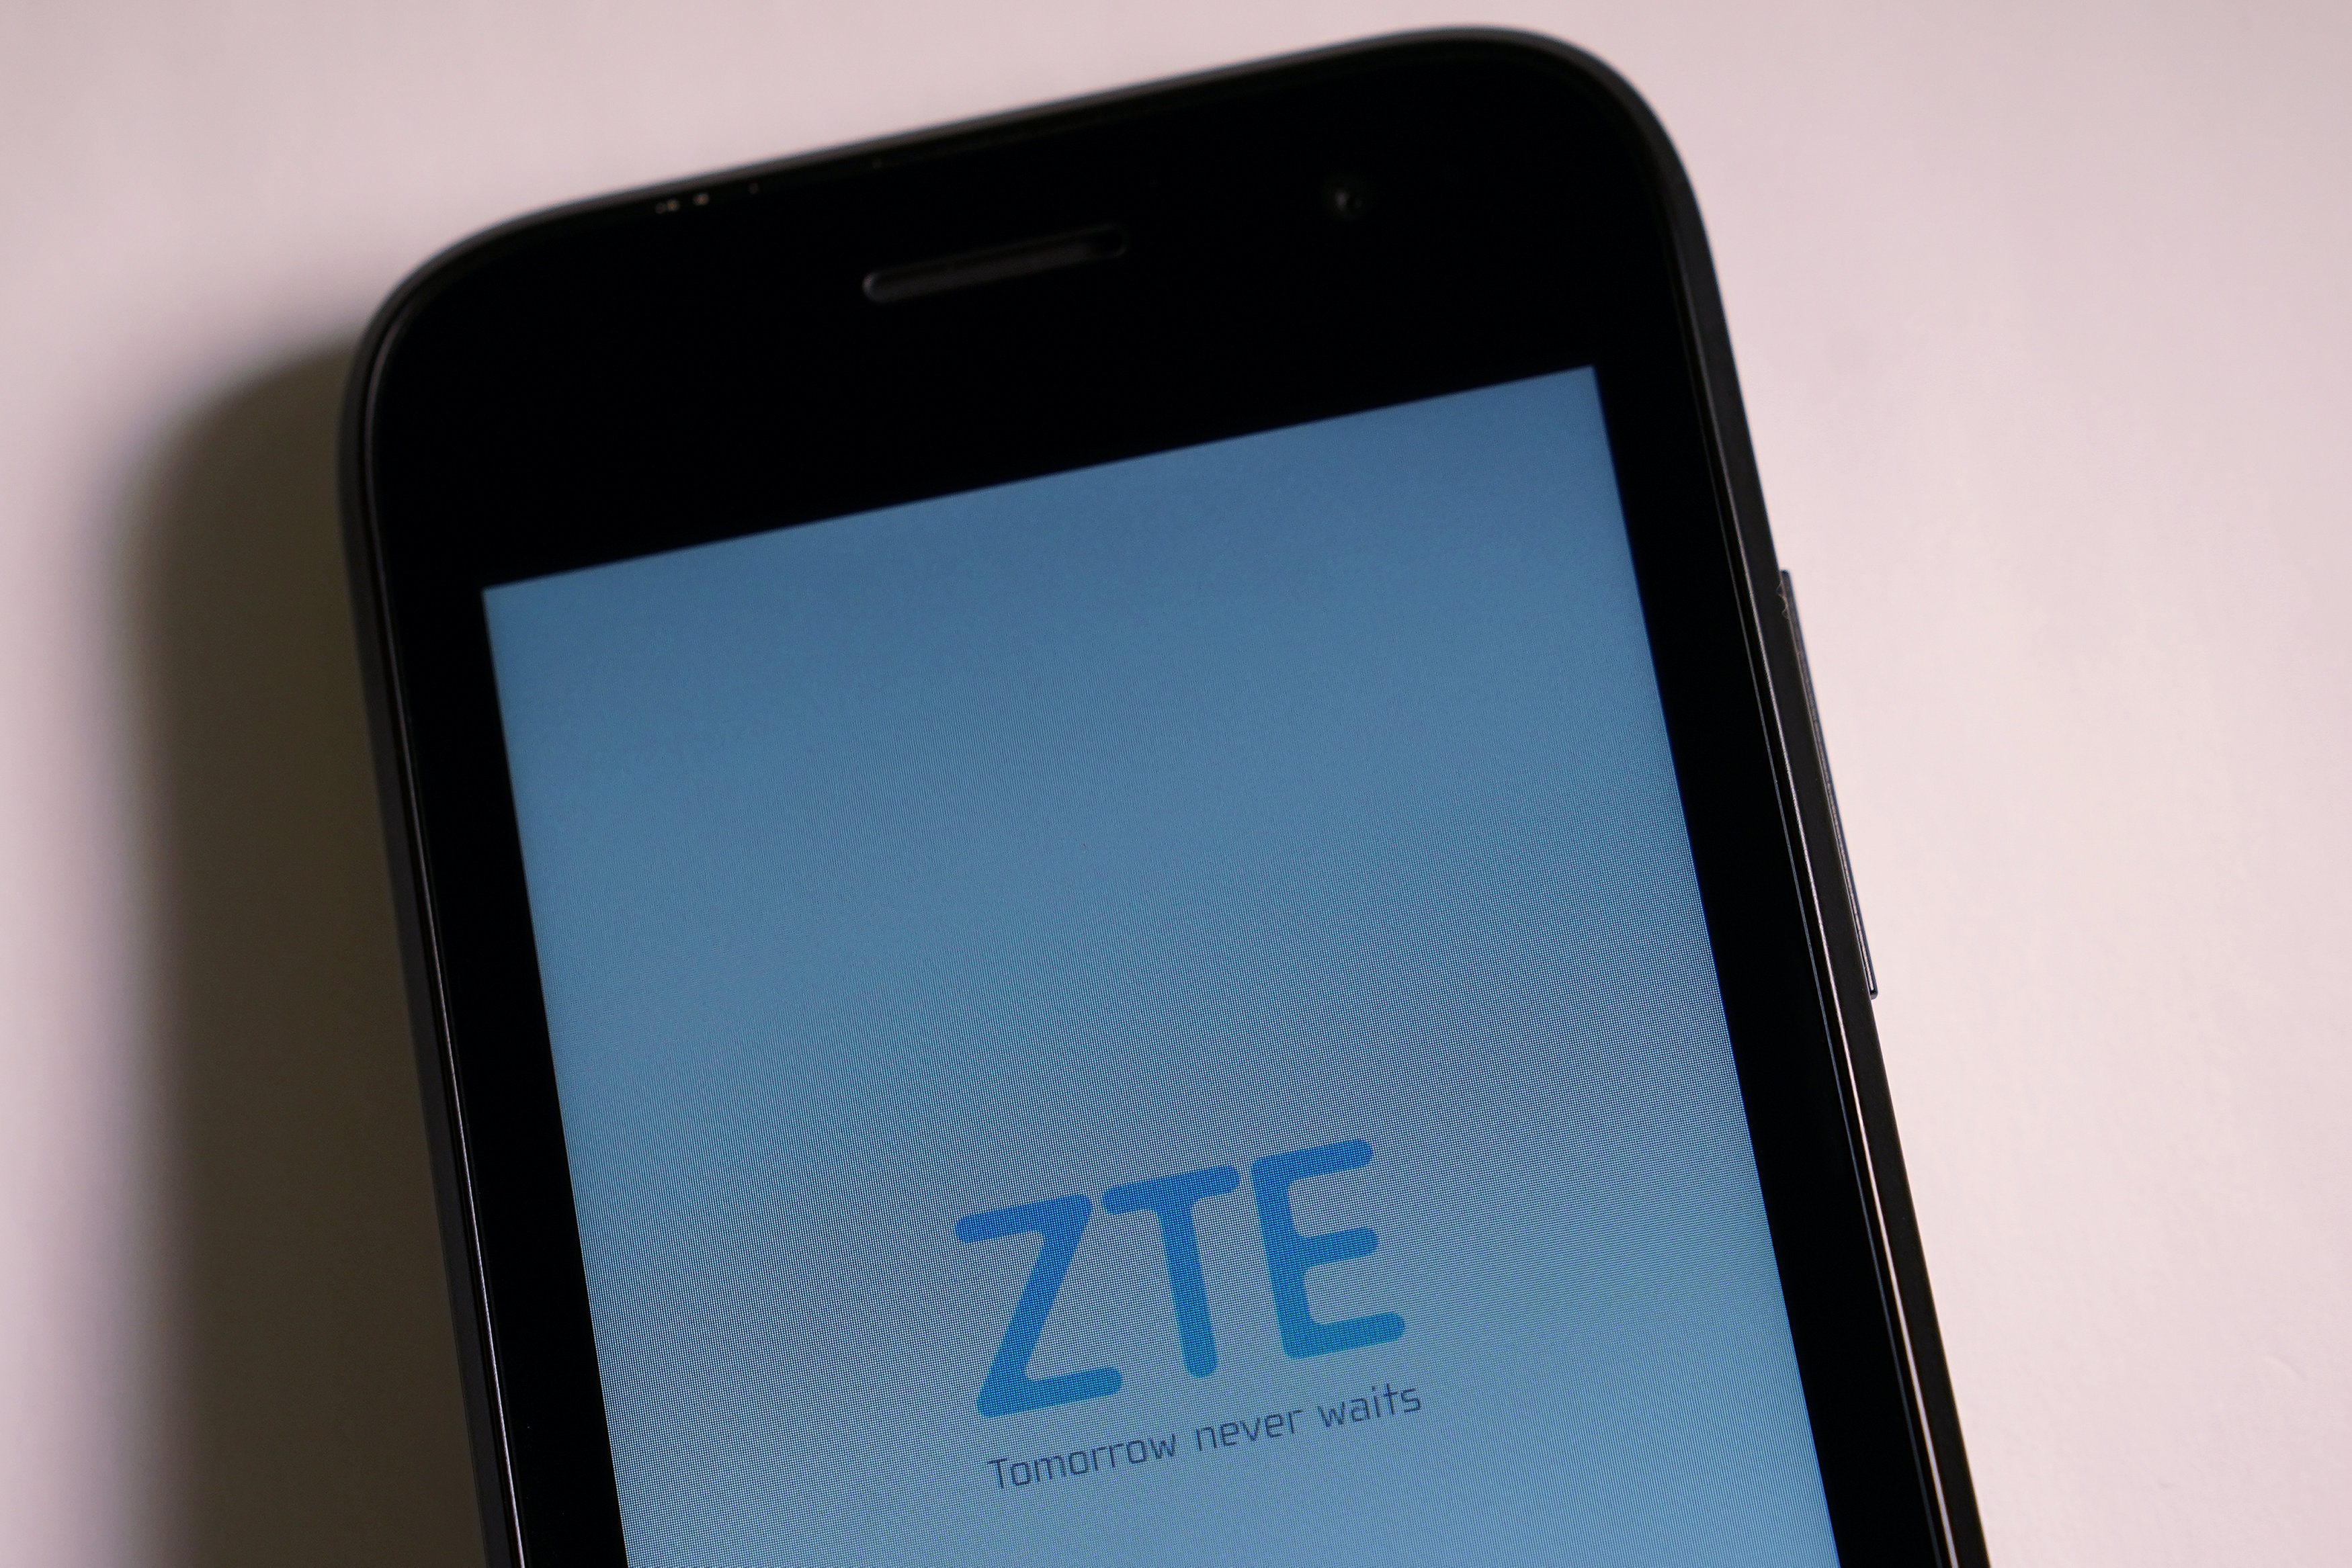 ZTE may lose Android license as US market woes build